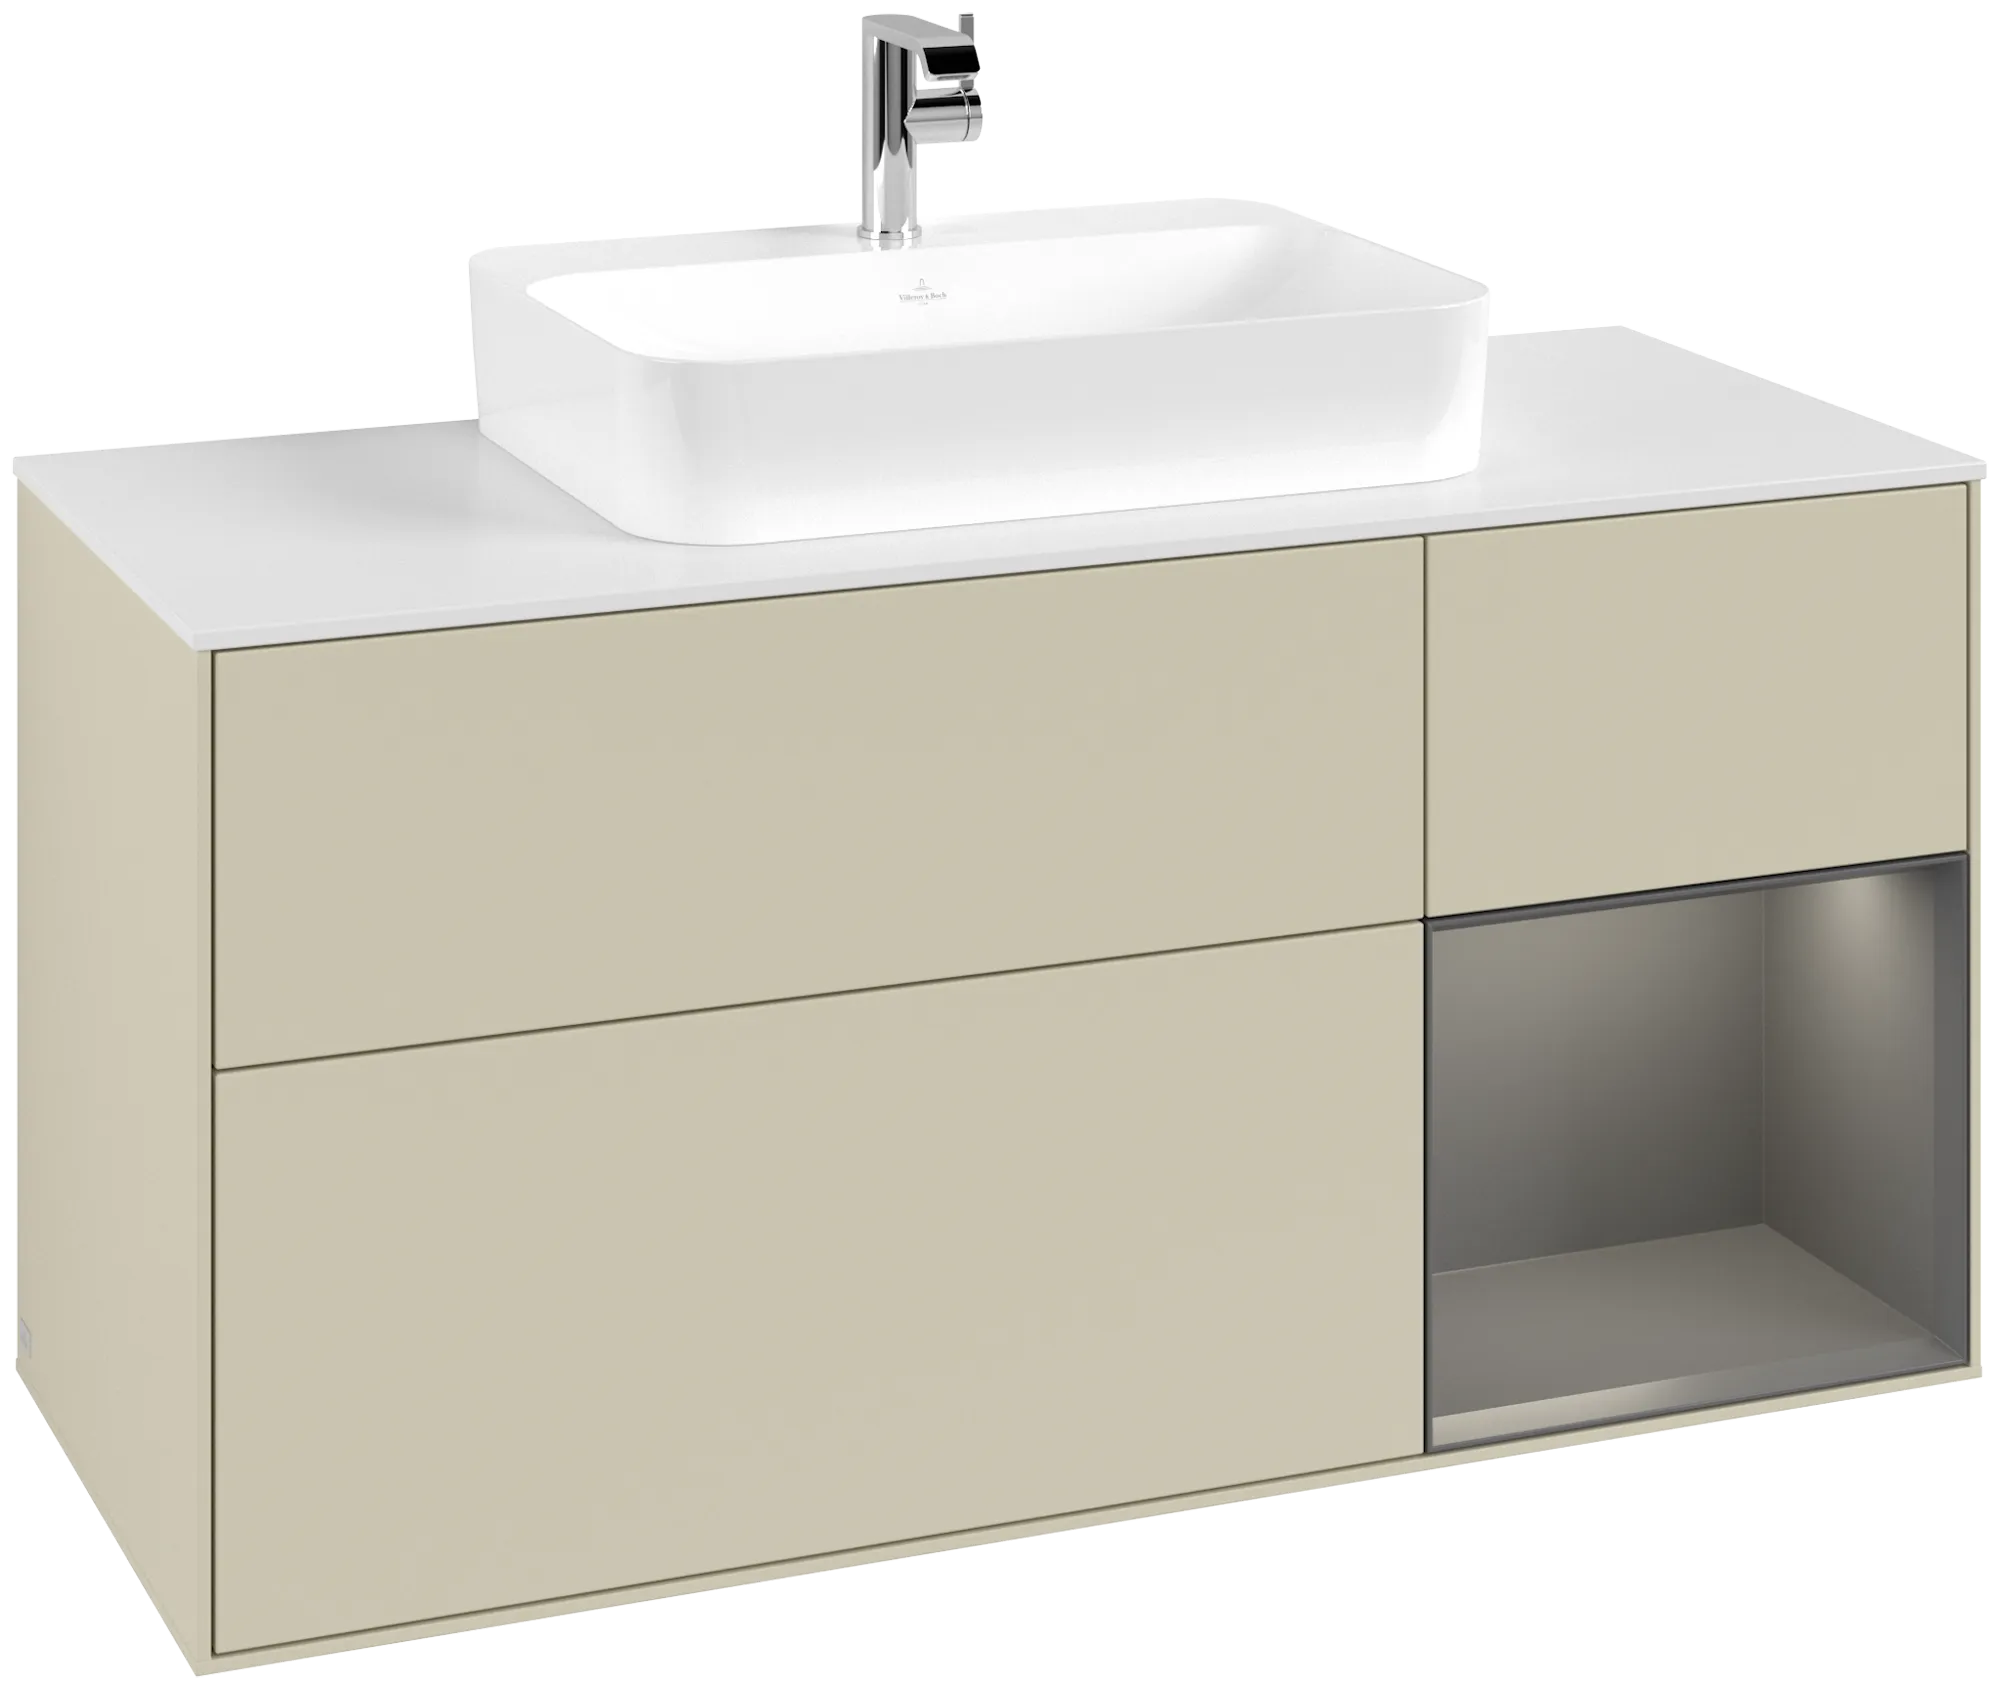 Obrázek VILLEROY BOCH Finion Vanity unit, with lighting, 3 pull-out compartments, 1200 x 603 x 501 mm, Silk Grey Matt Lacquer / Anthracite Matt Lacquer / Glass White Matt #G421GKHJ